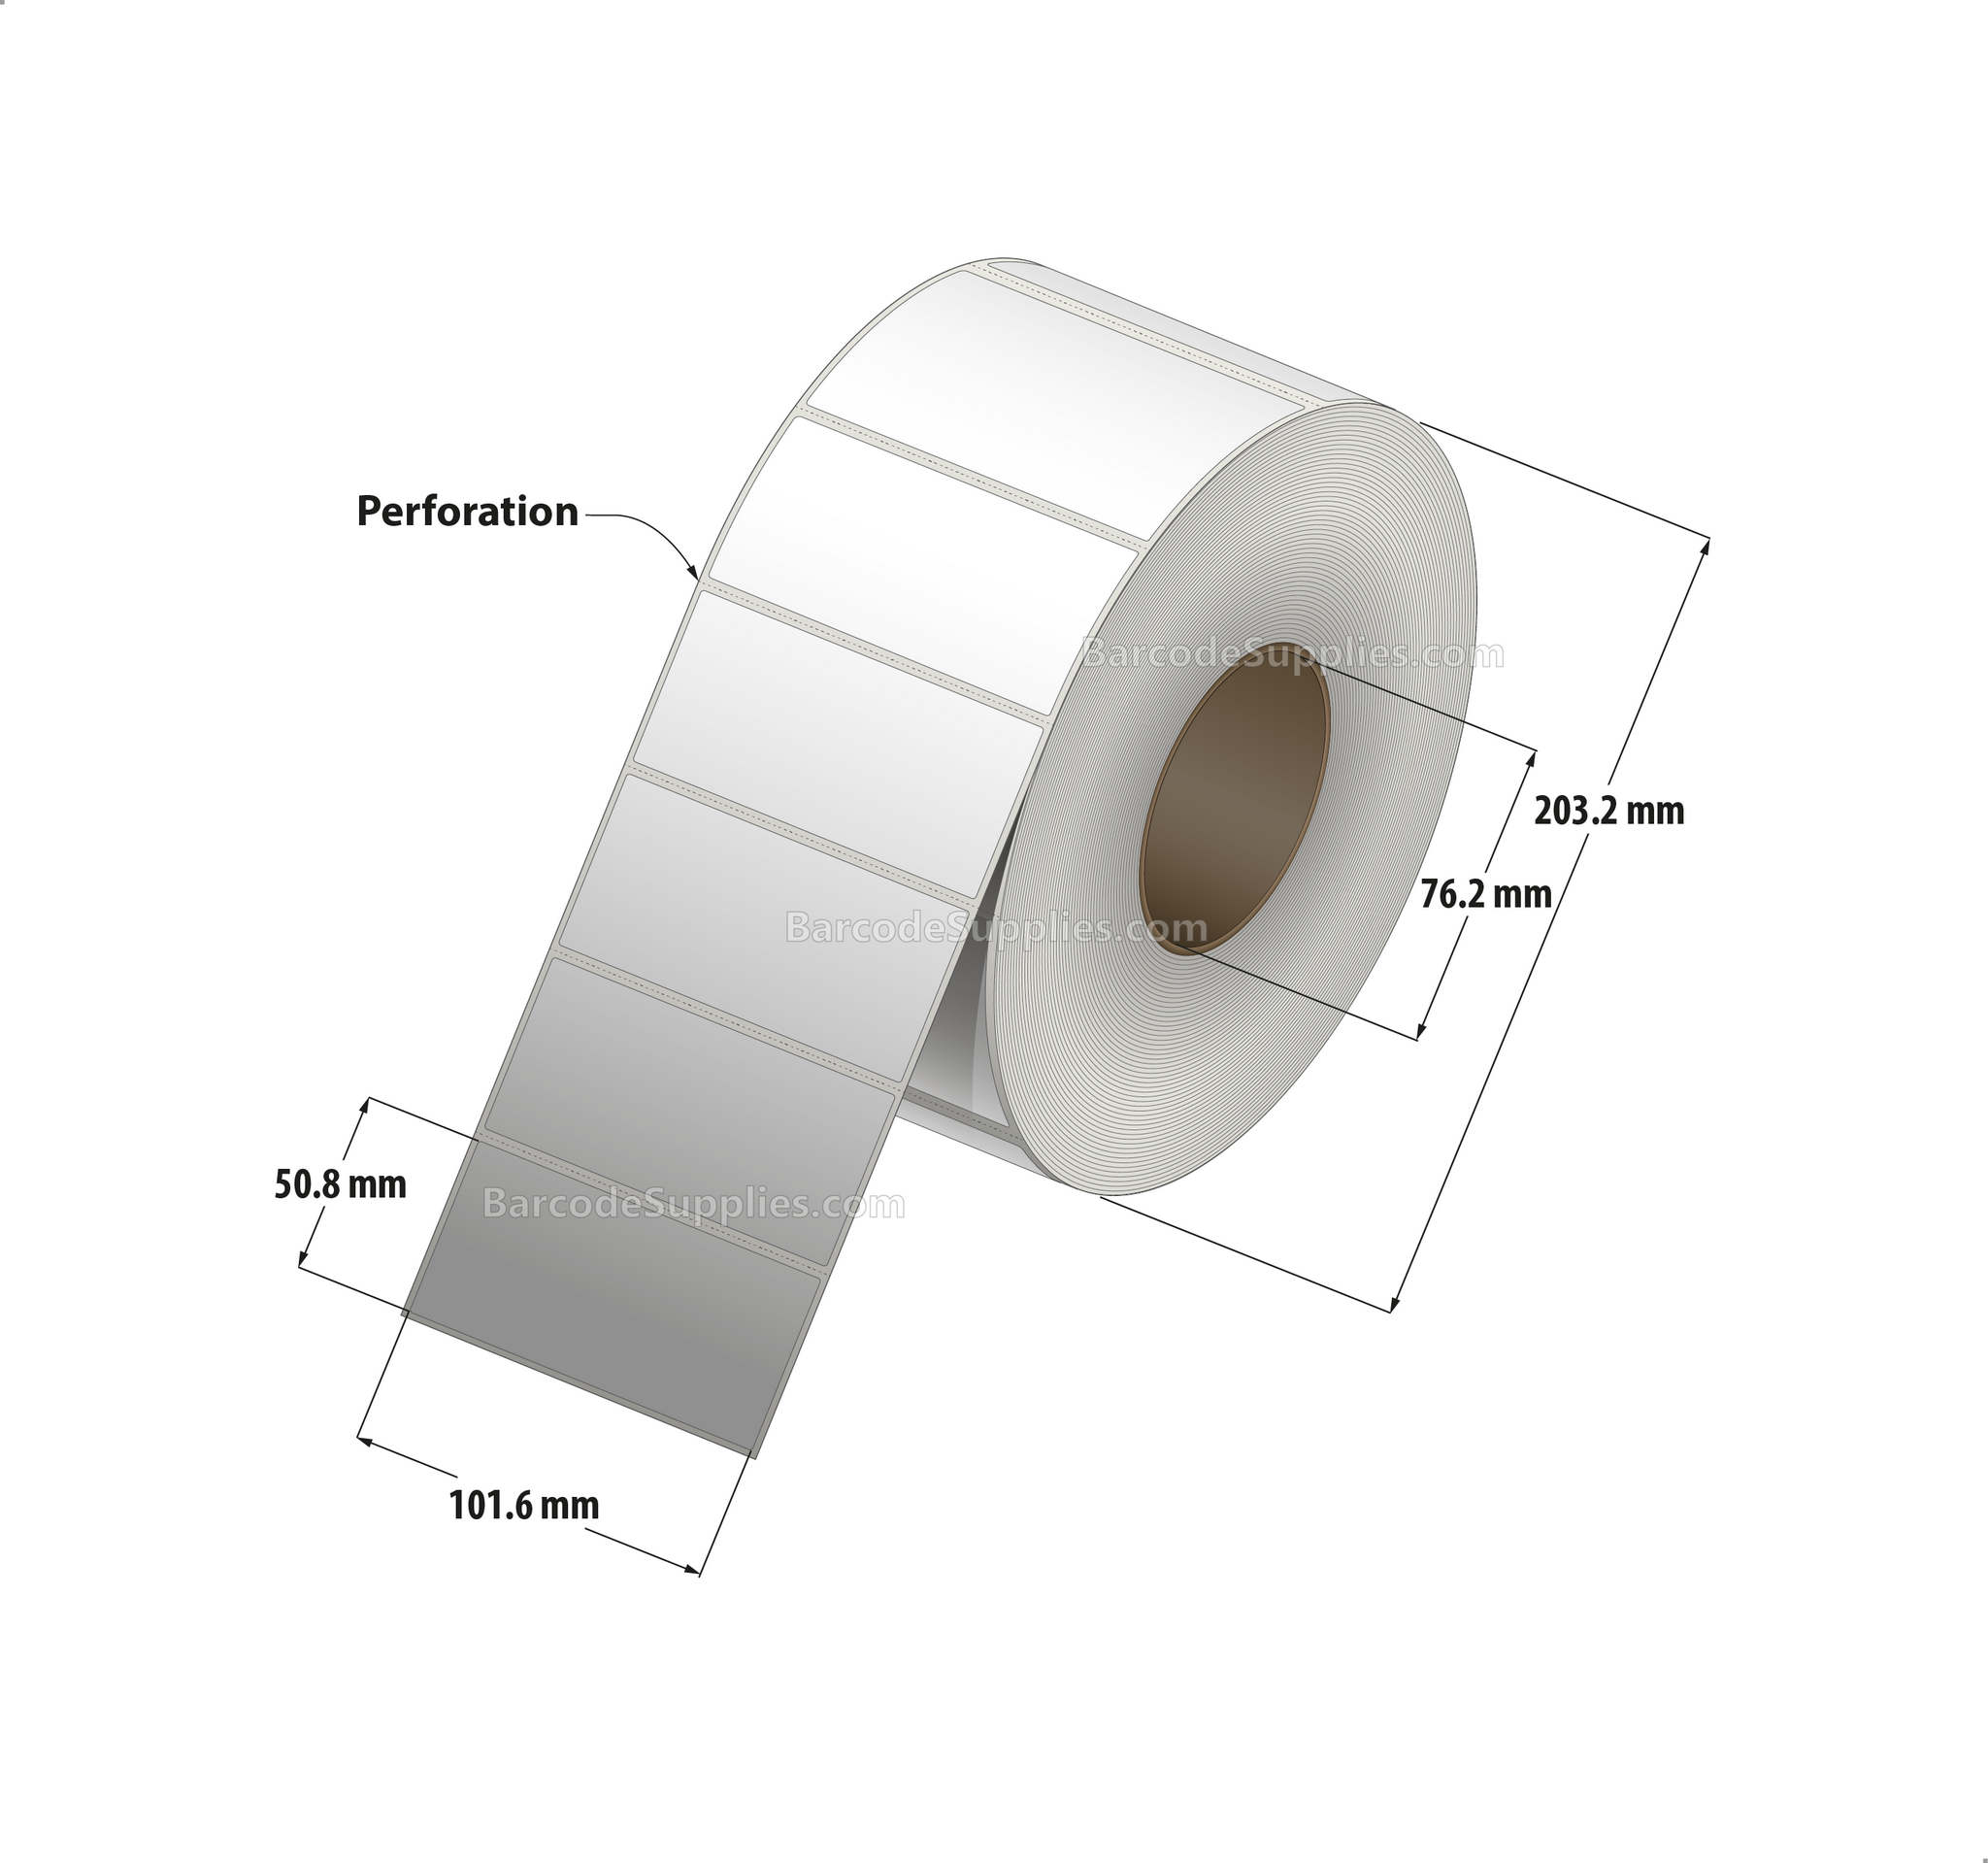 4 x 2 Direct Thermal White Labels With Acrylic Adhesive - Perforated - 2900 Labels Per Roll - Carton Of 4 Rolls - 11600 Labels Total - MPN: RDS-4-2-2900-3